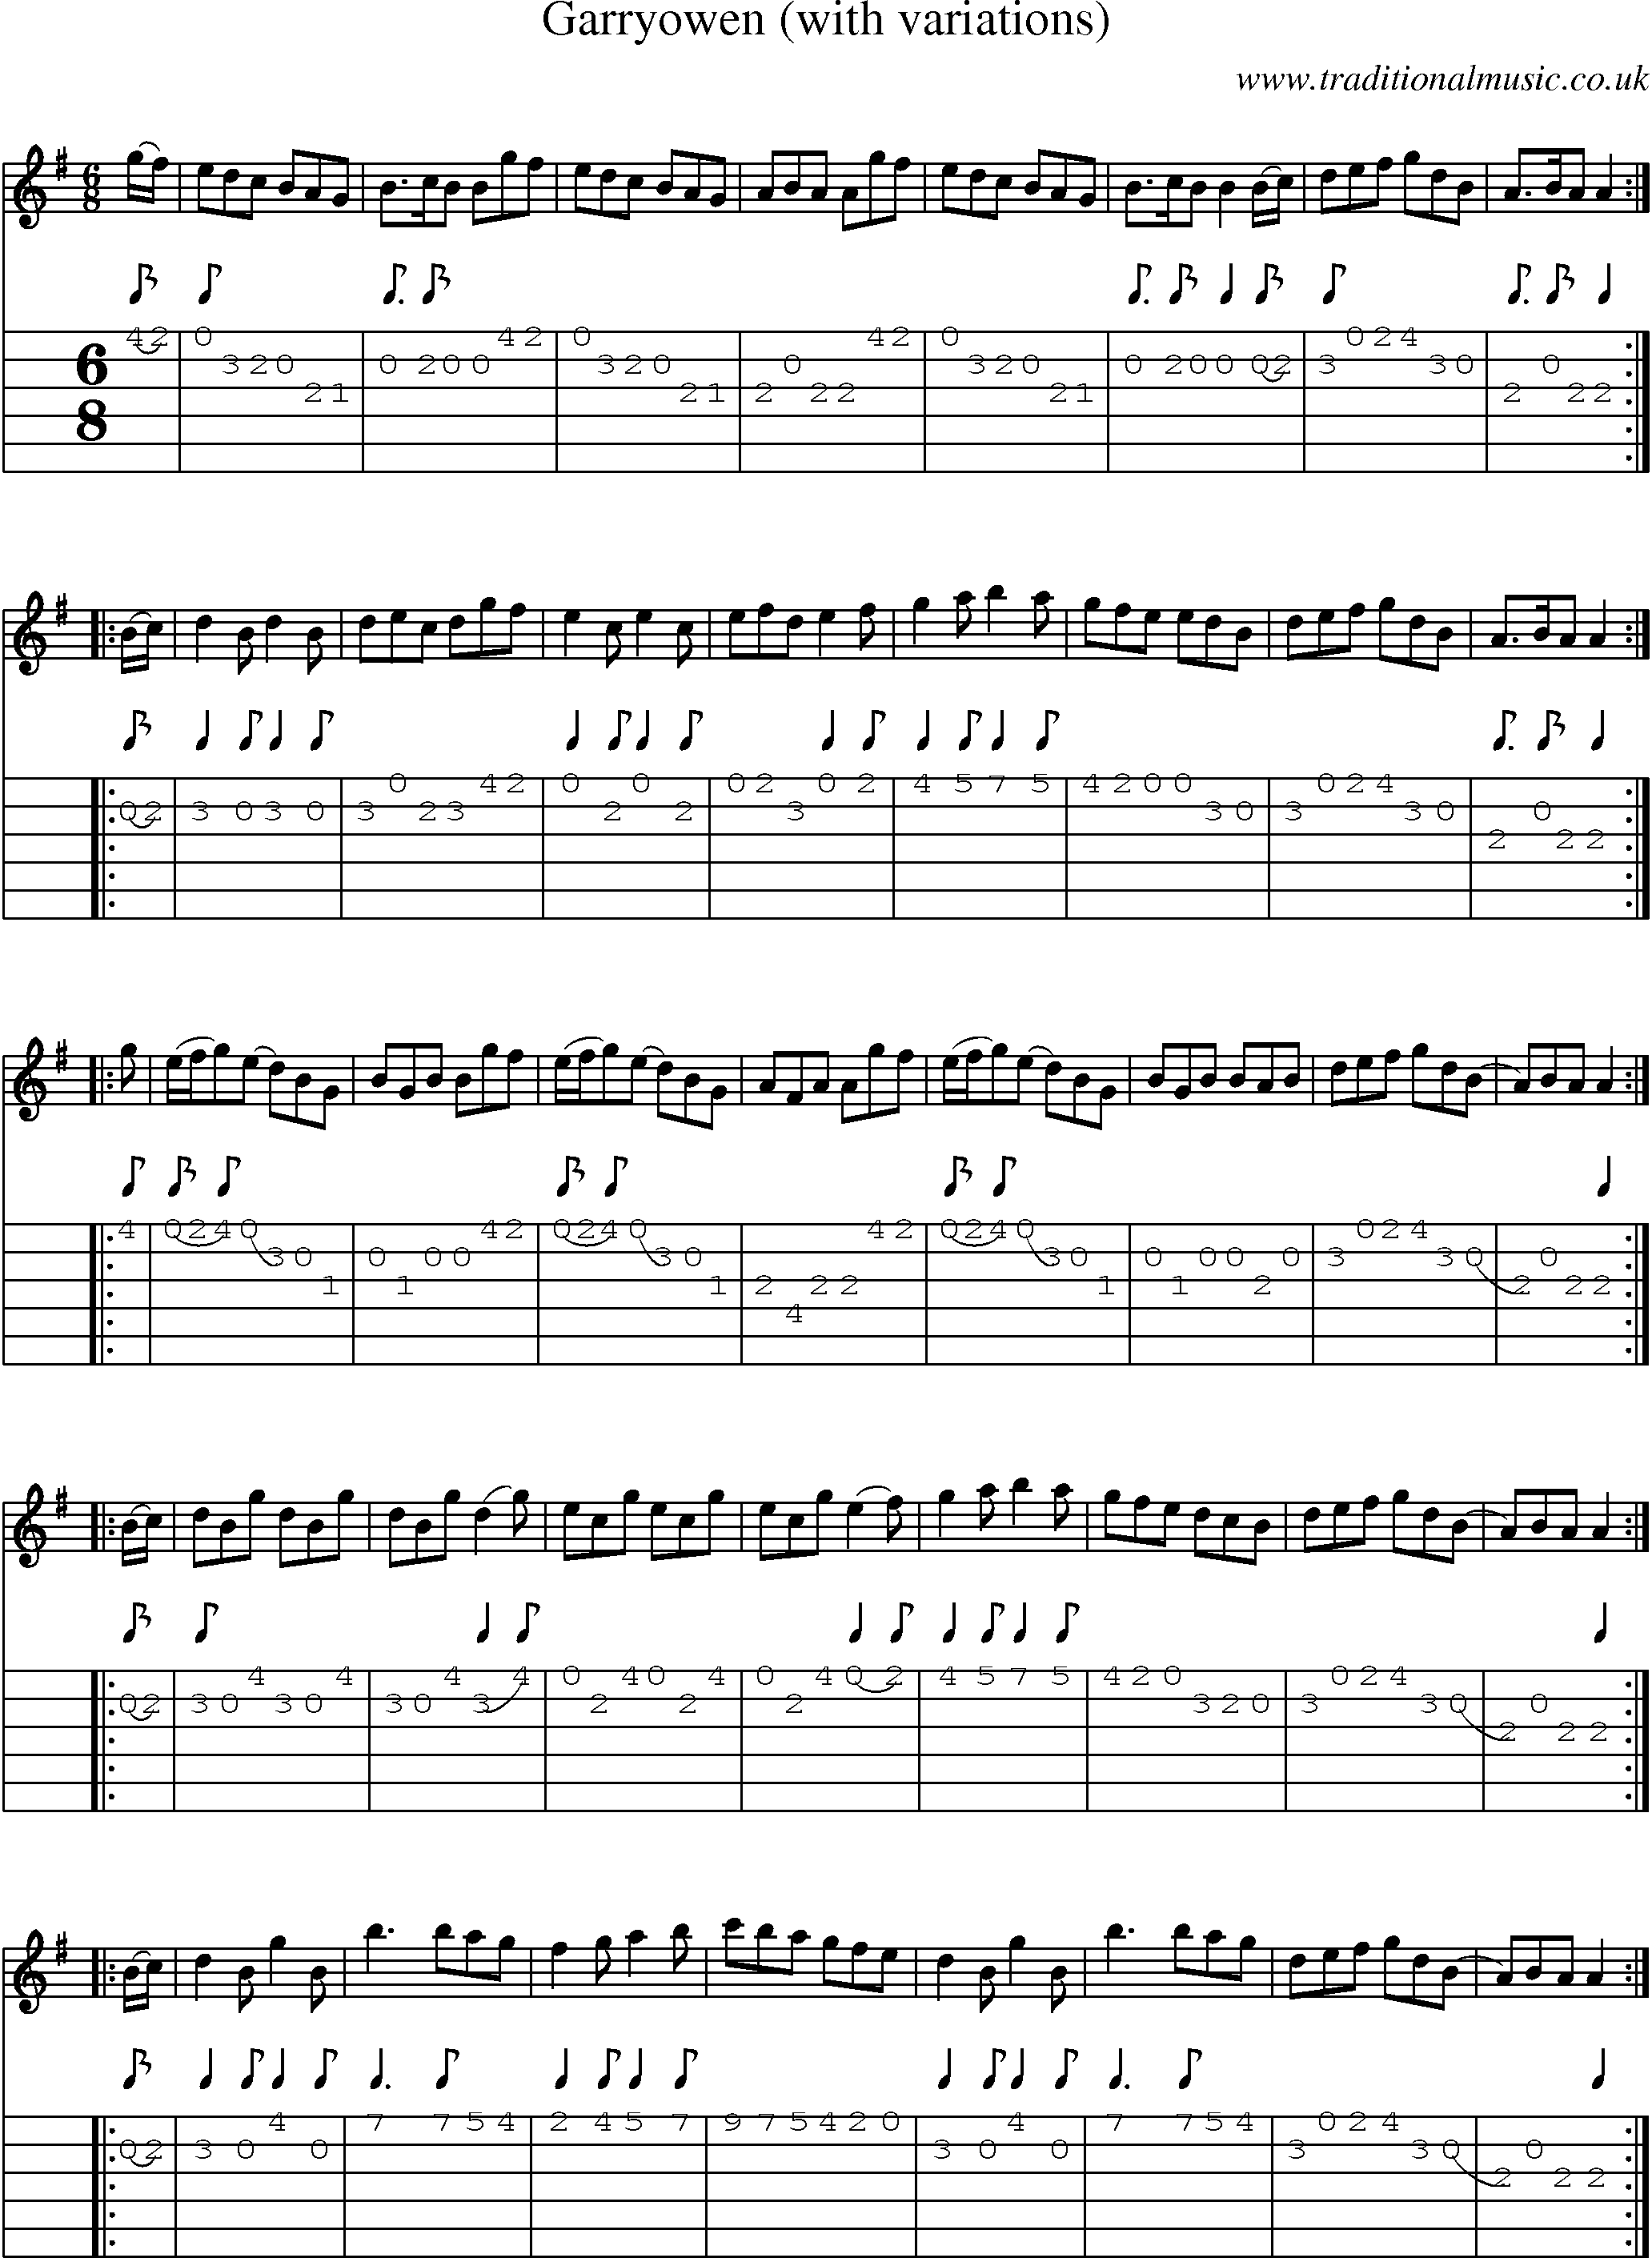 Music Score and Guitar Tabs for Garryowen With Variations